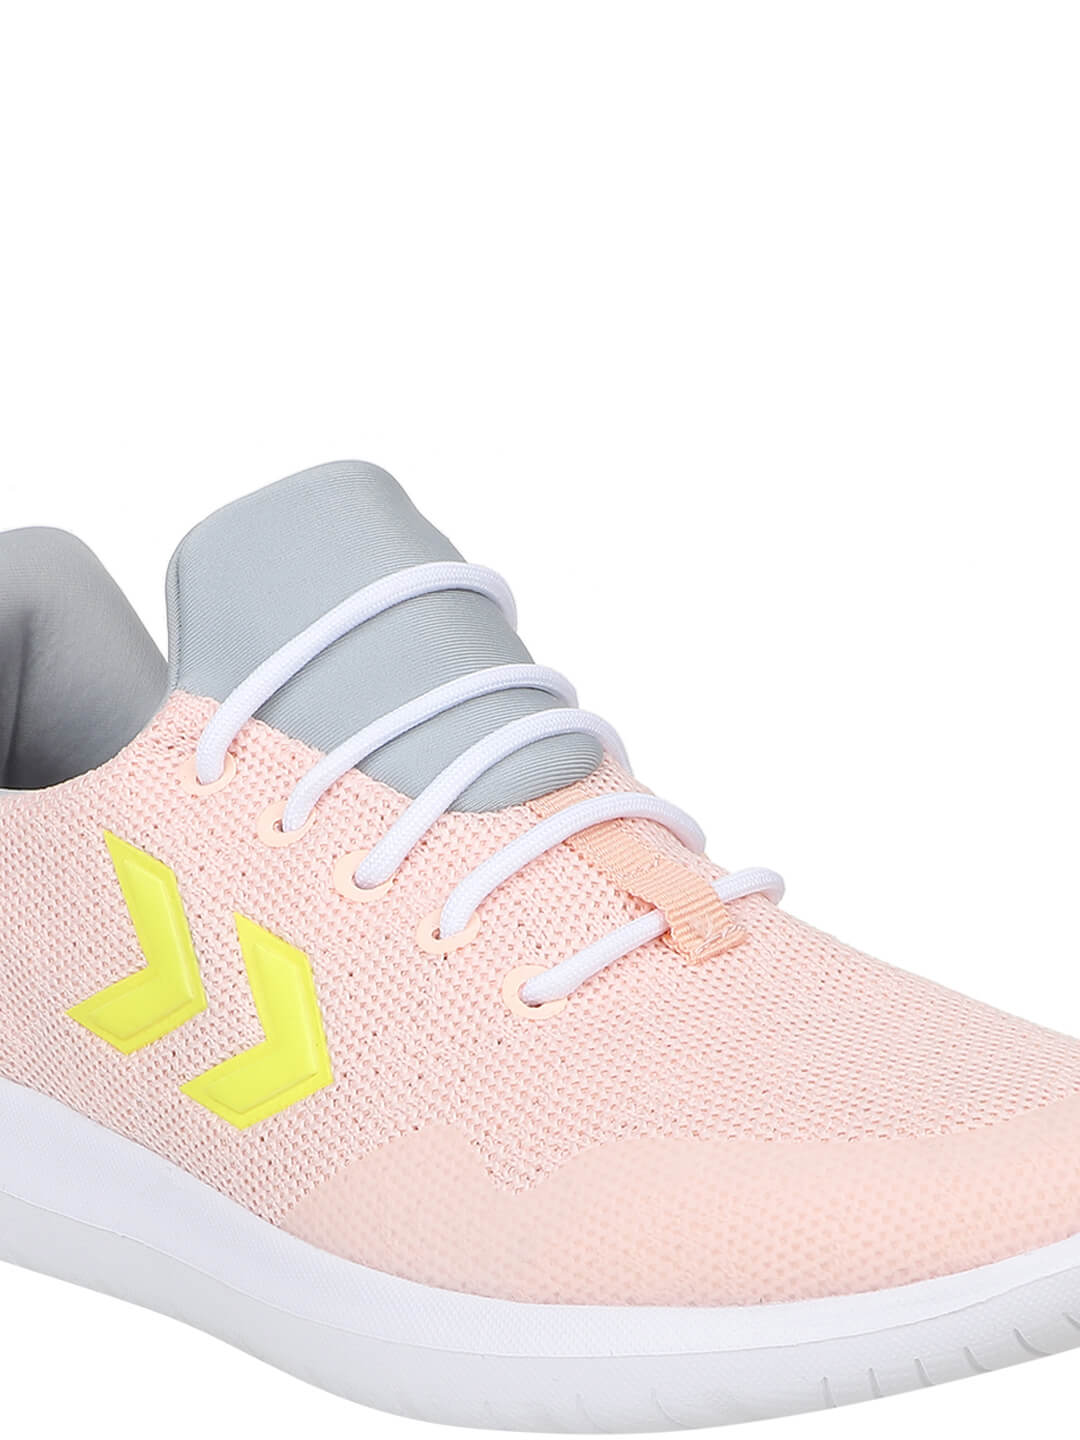 Actus Trainer 2.0 Pink Gym for Women